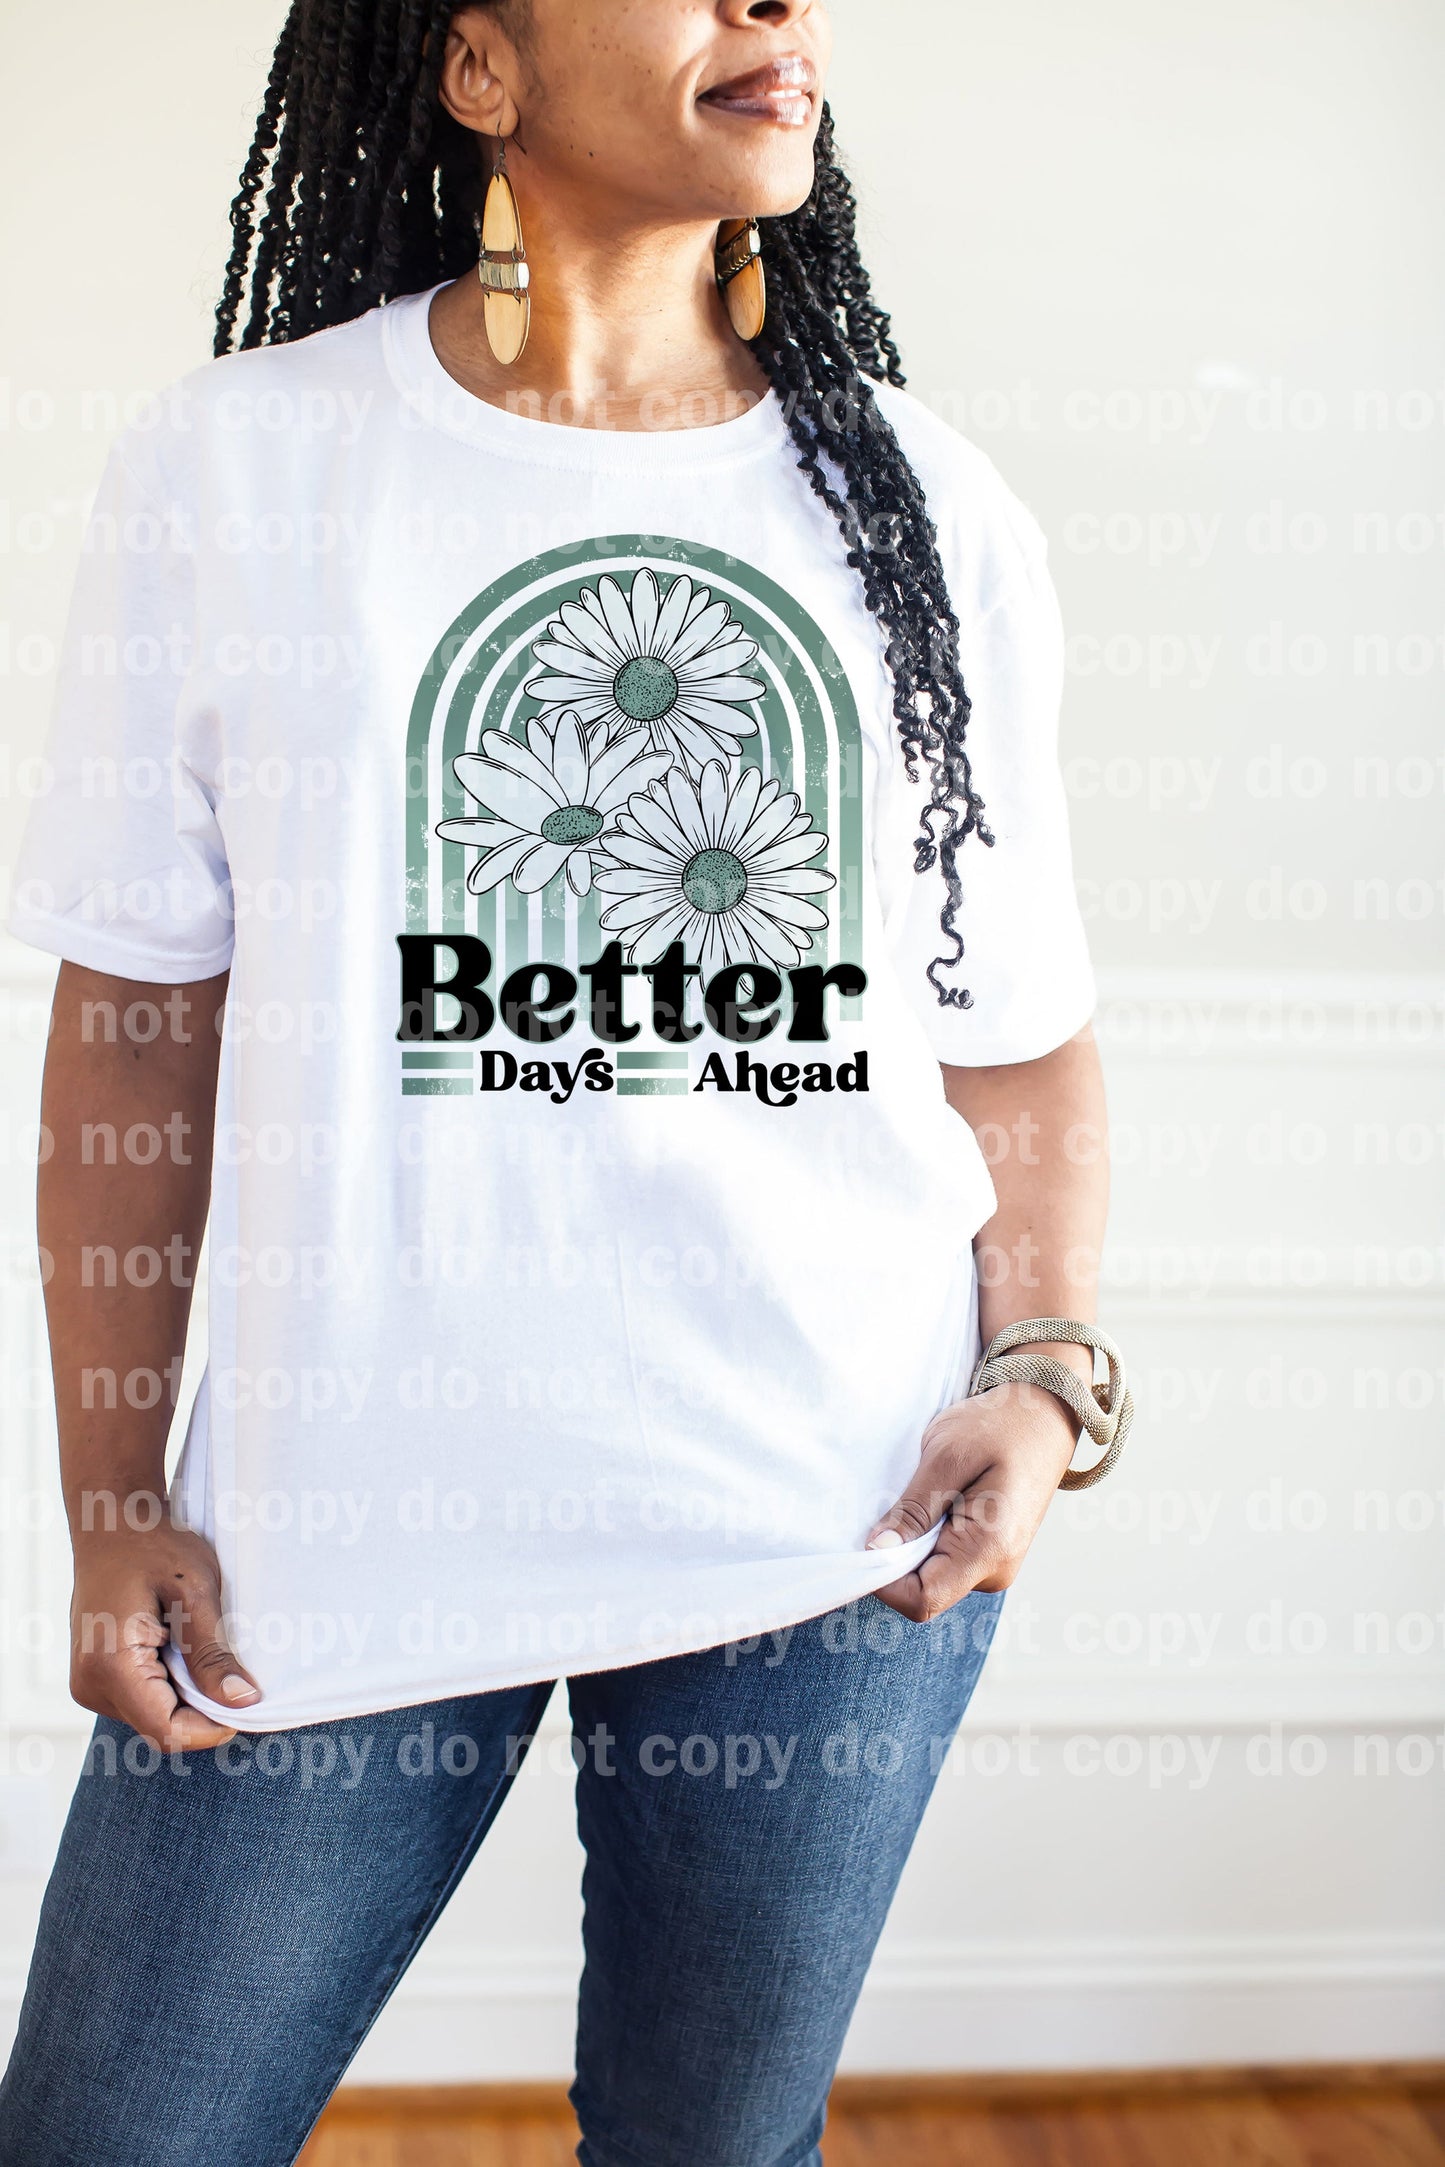 Better Days Ahead Dream Print or Sublimation Print